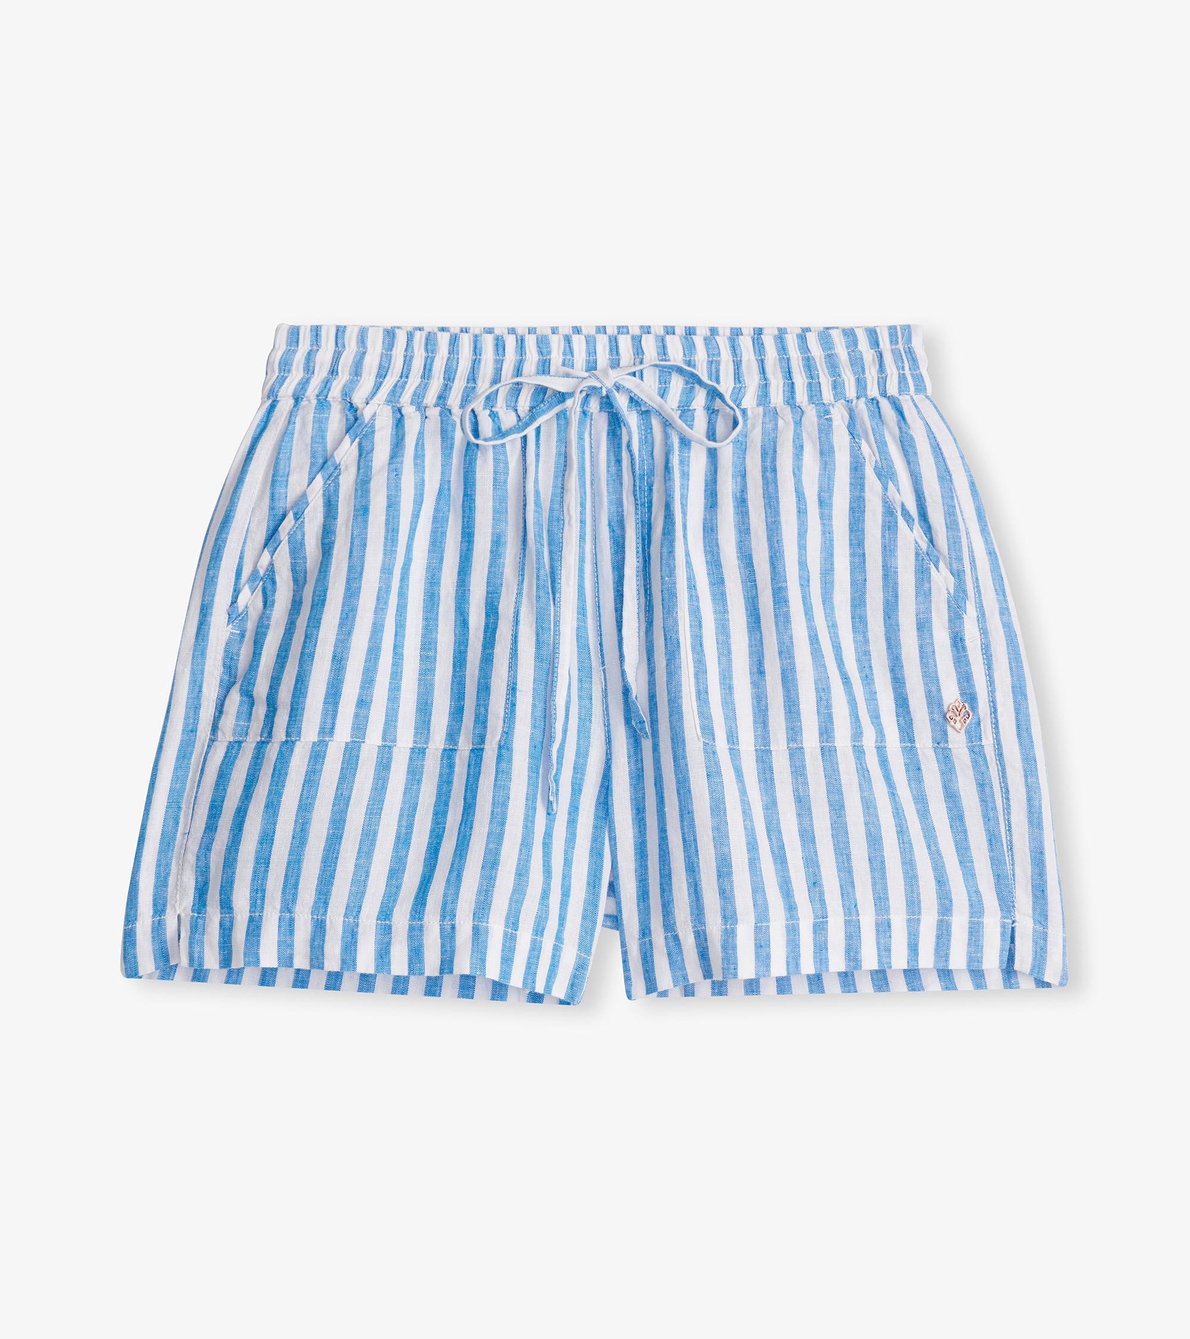 View larger image of Everywhere Shorts - French Blue Stripes